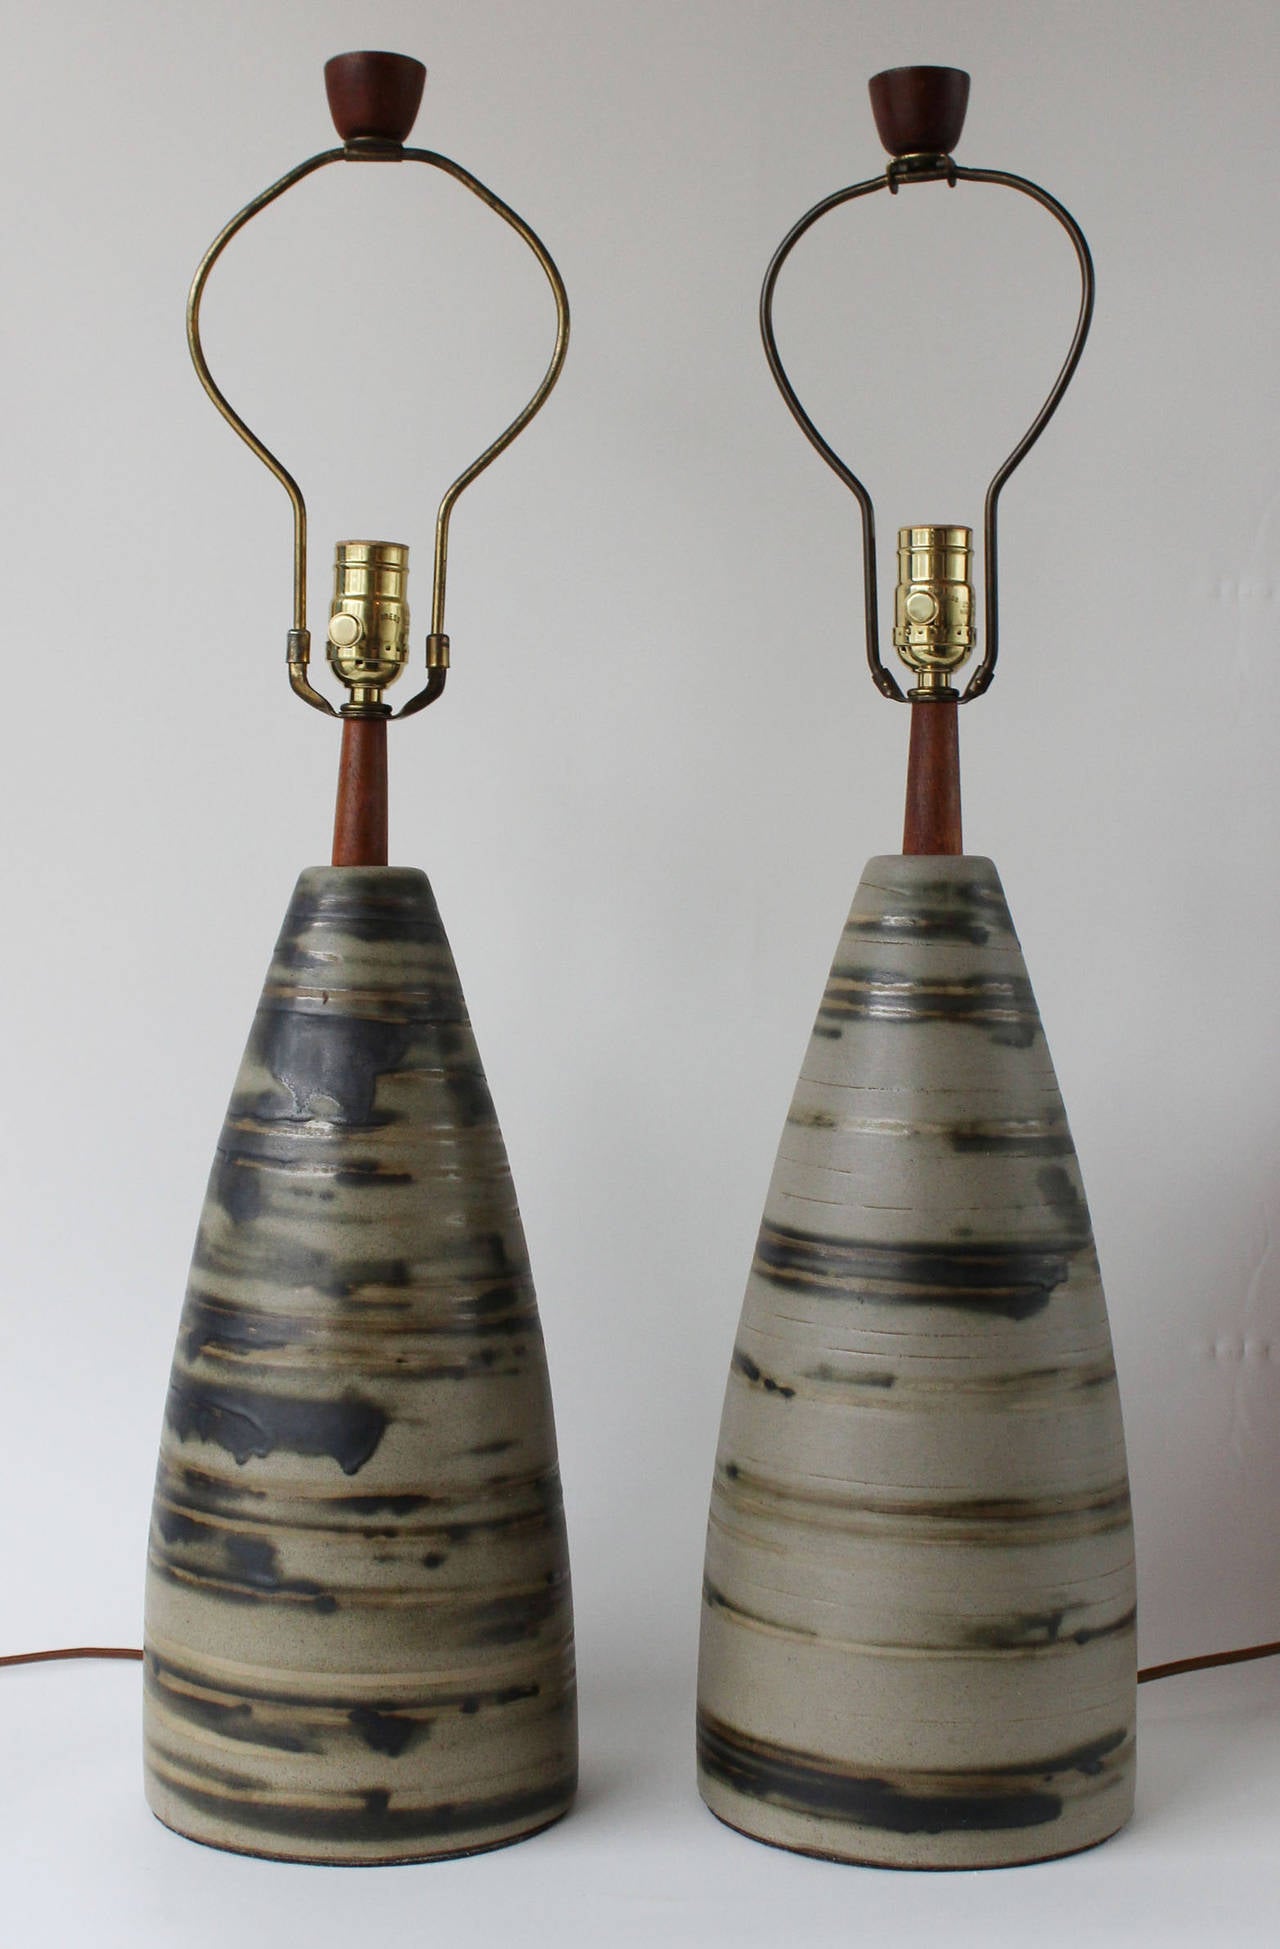 A pair of glazed ceramic lamps with teak neck and finial details by Jane and Gordon Martz for Marshall Studios. 

18.5